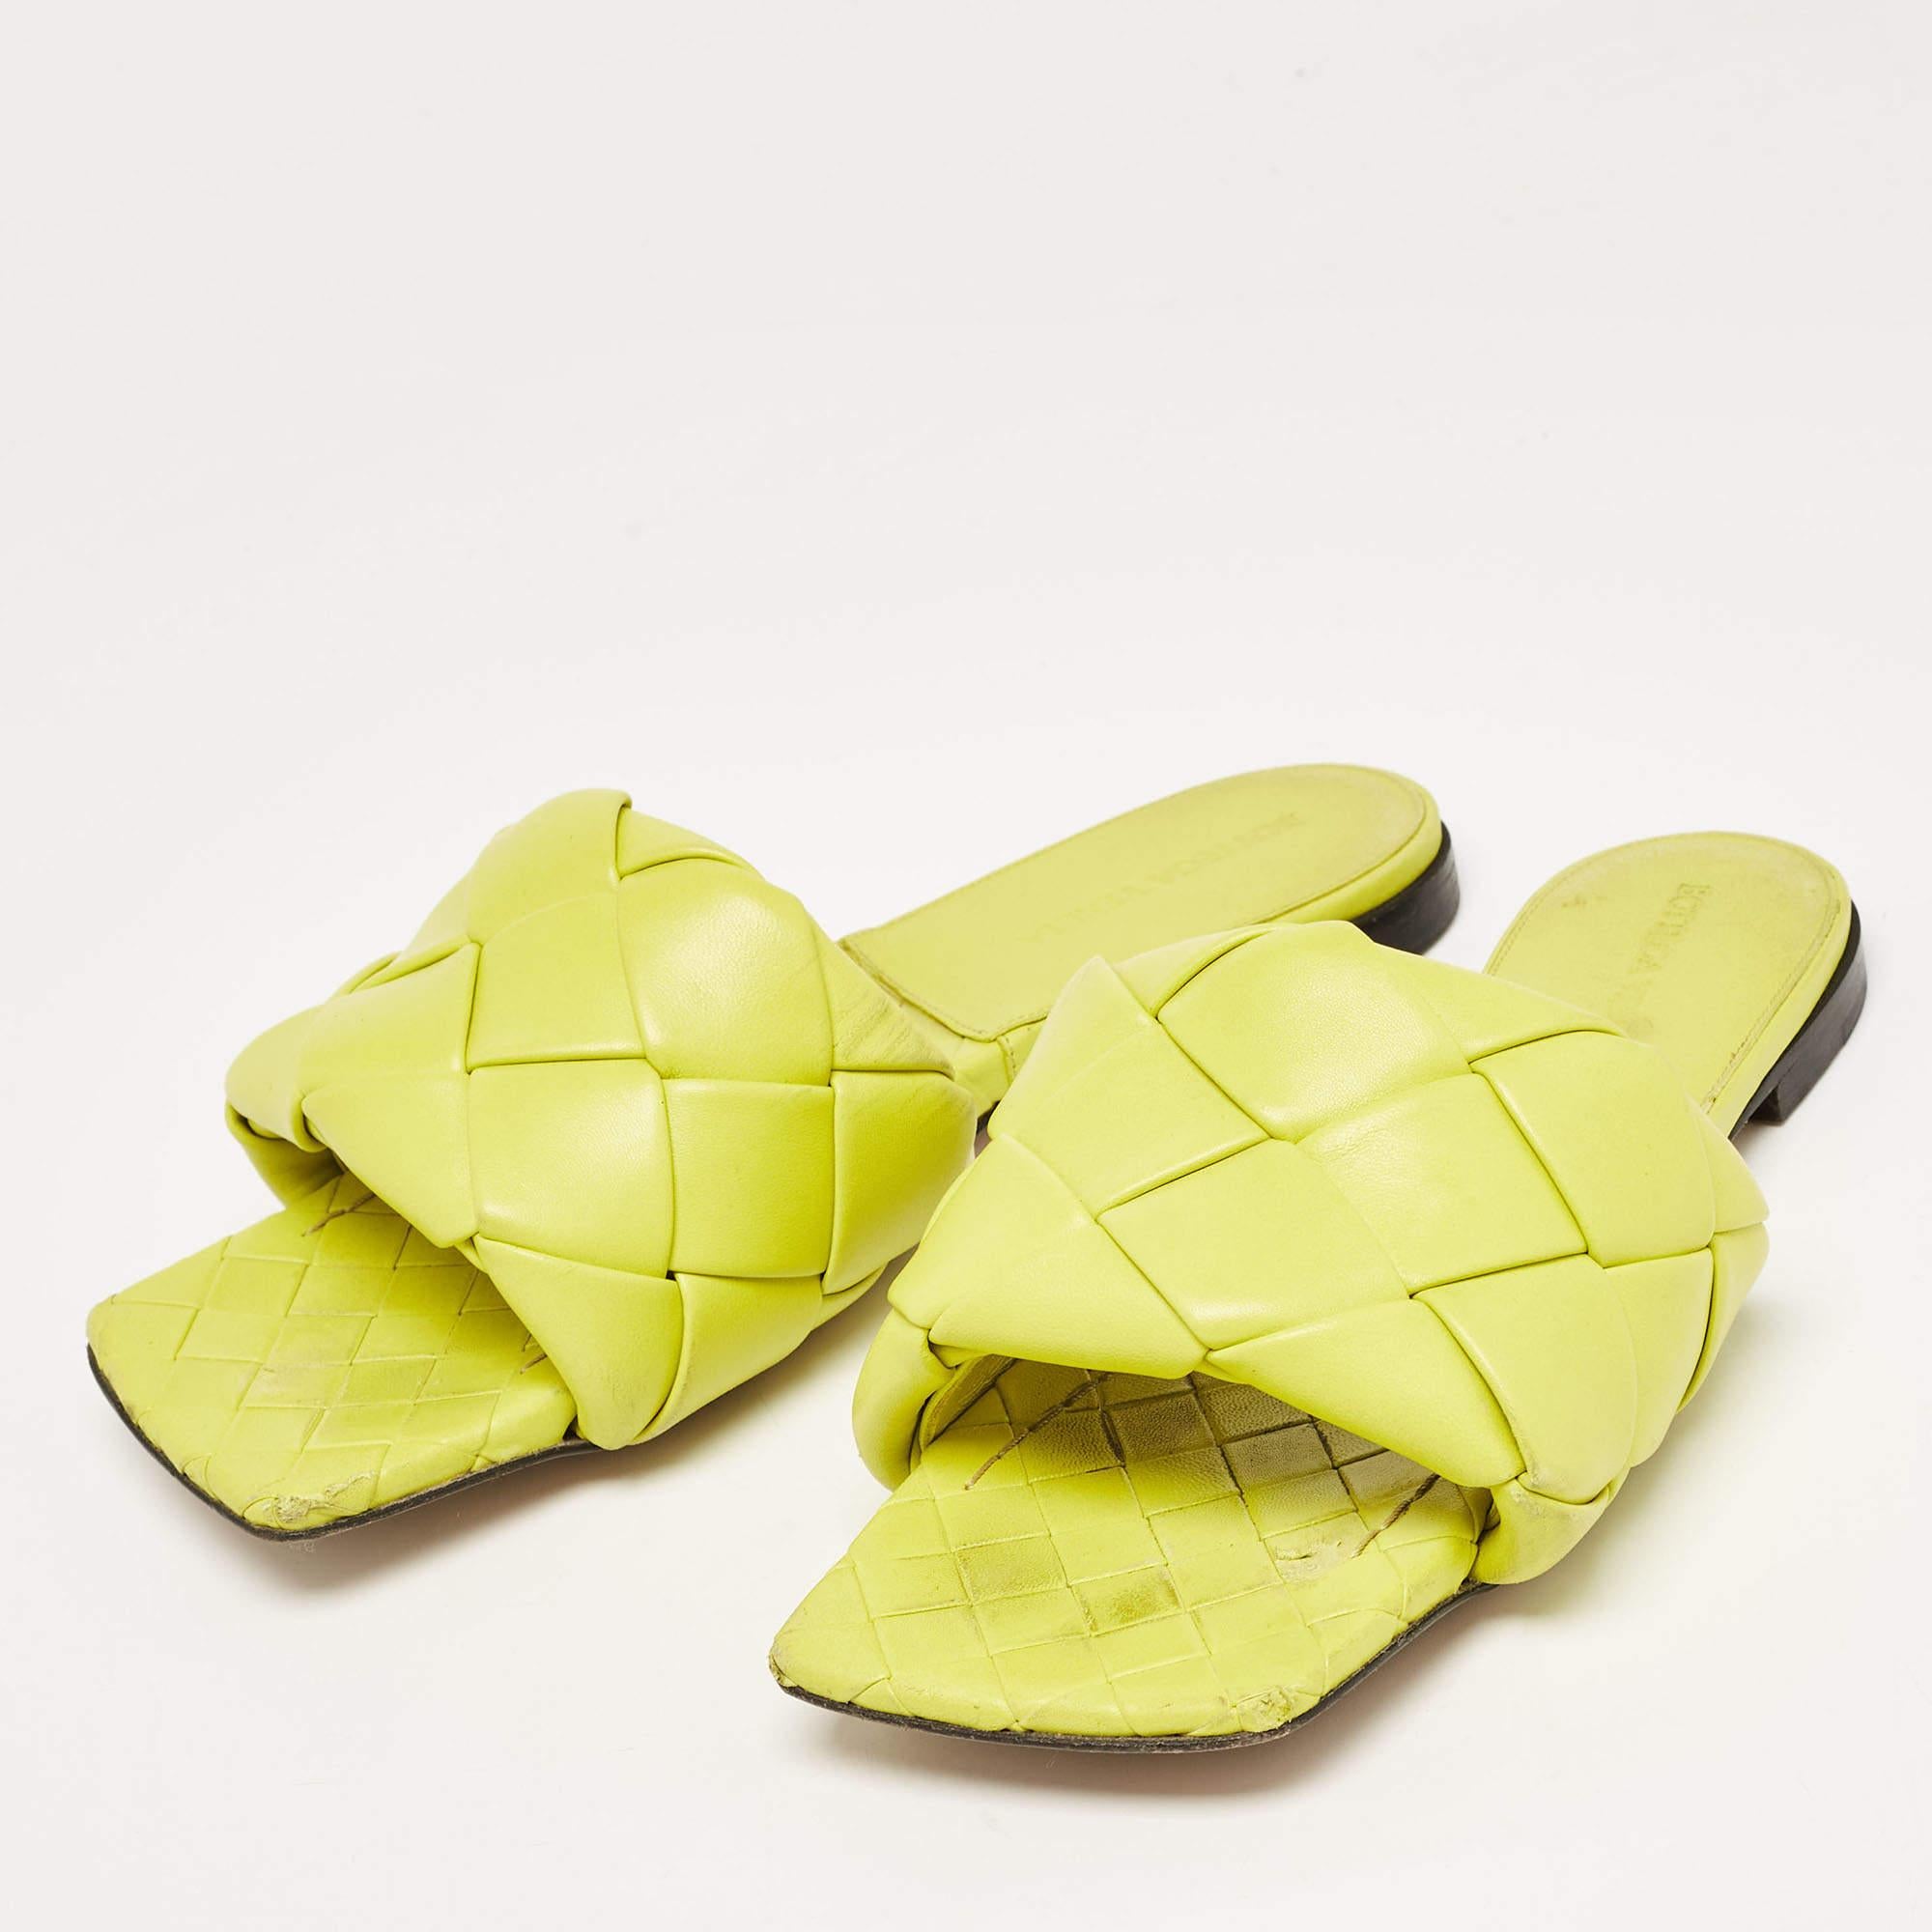 Frame your feet with these Bottega Veneta flat sandals. Created using the best materials, the flats are perfect with short, midi, and maxi hemlines.

